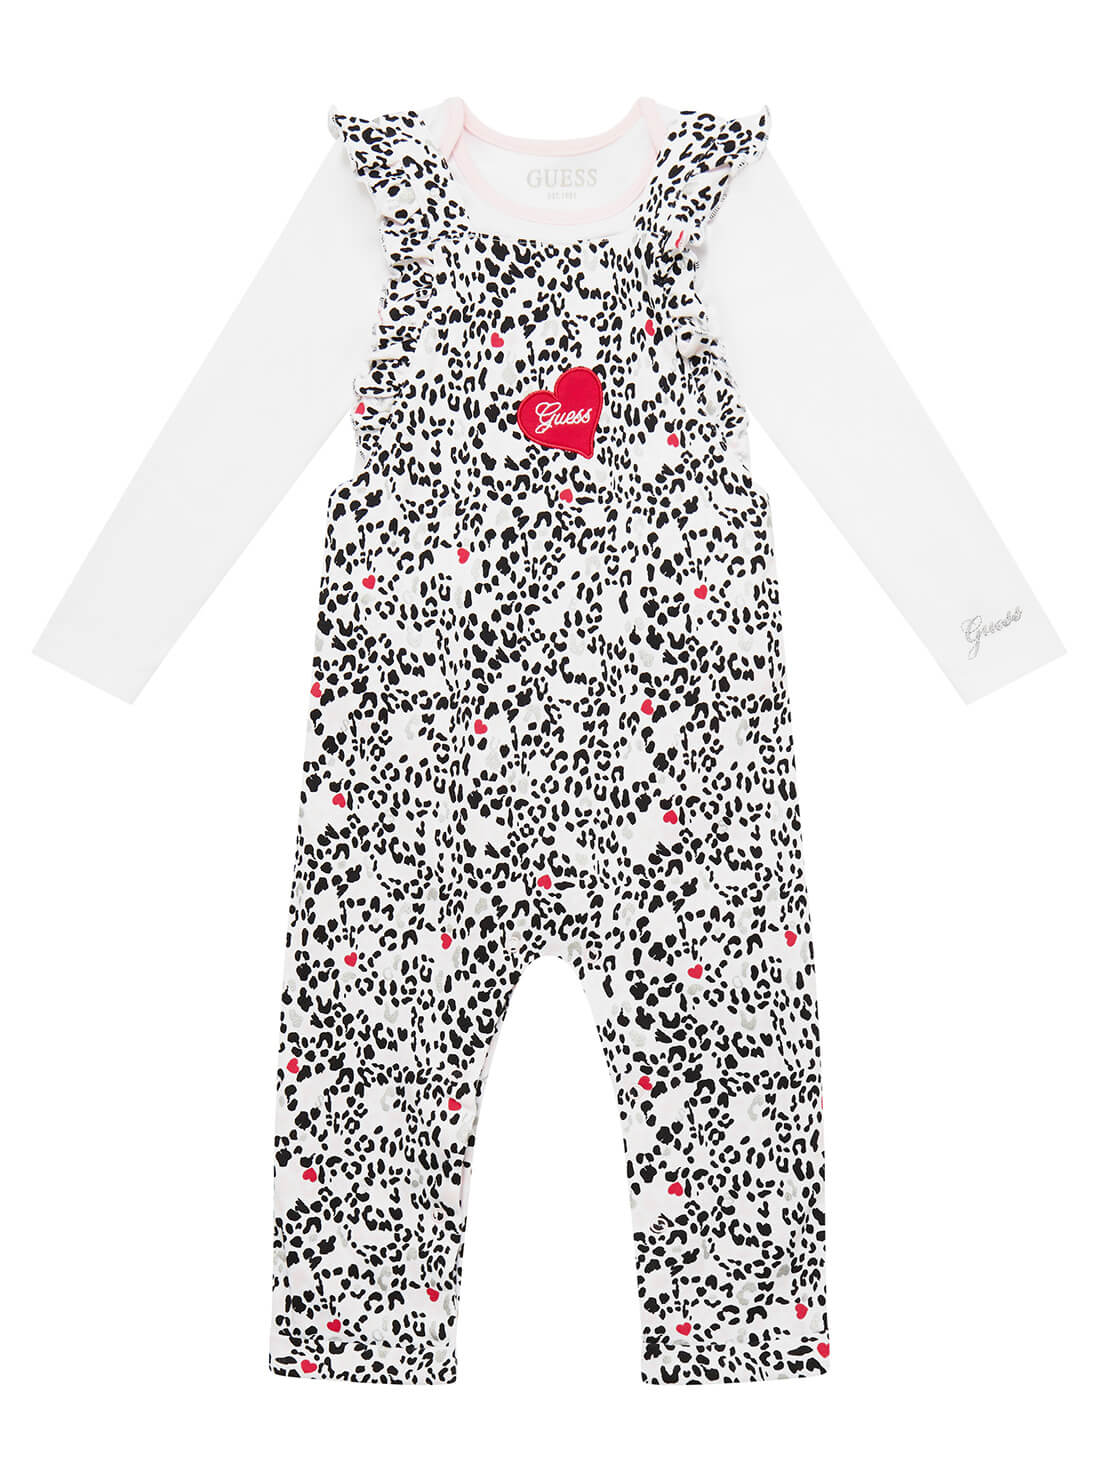 GUESS Baby Girl Black White Dalmatian Top And Overall 2-Piece Set (0-12m) S1YG02J1311 Front View